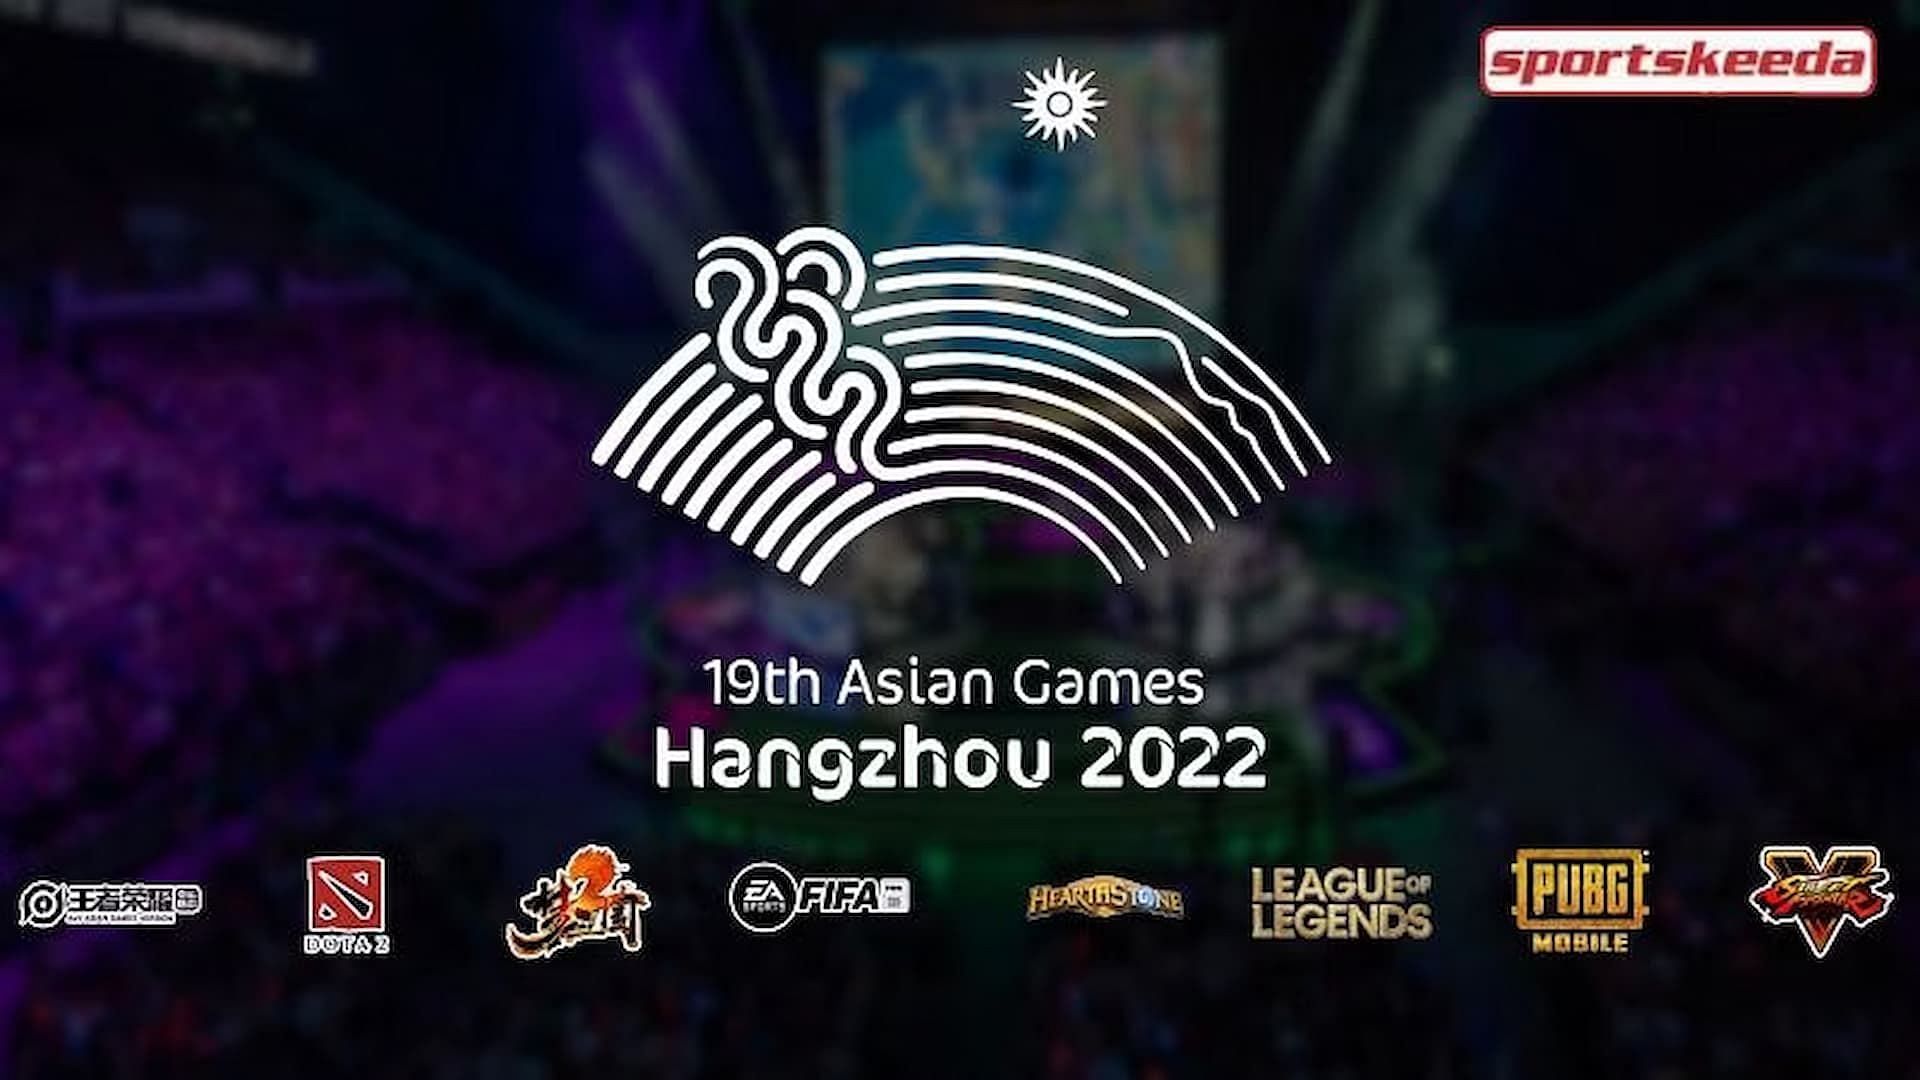 Indian esports team schedule at Asian Games 2022: All dates, participants, events and more